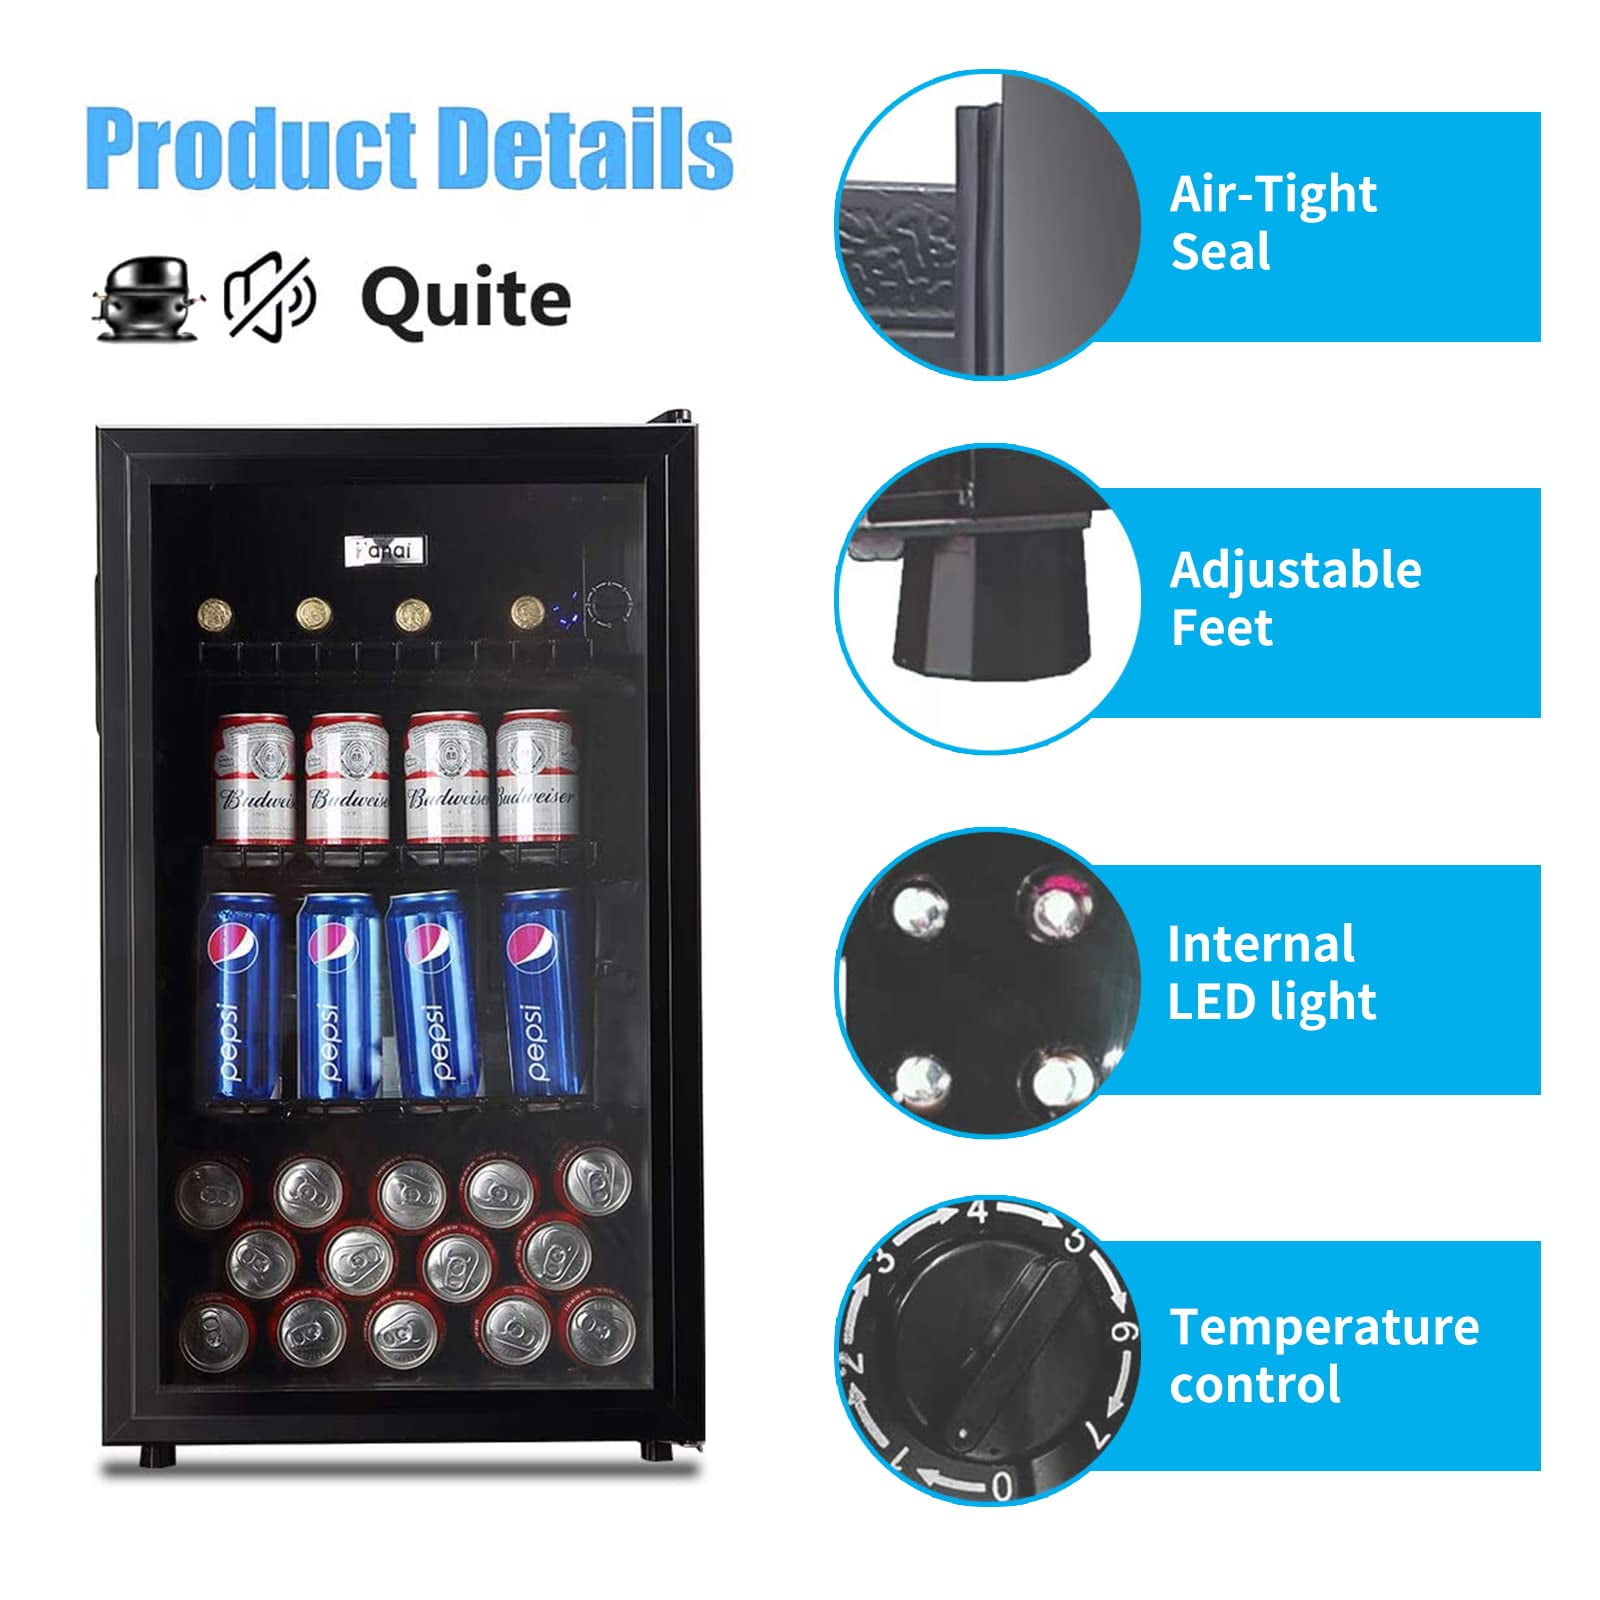 WANAI Wine Cooler and Beverage Refrigerator,120 Can Beverage Cooler,Small Fridge with Glass Door